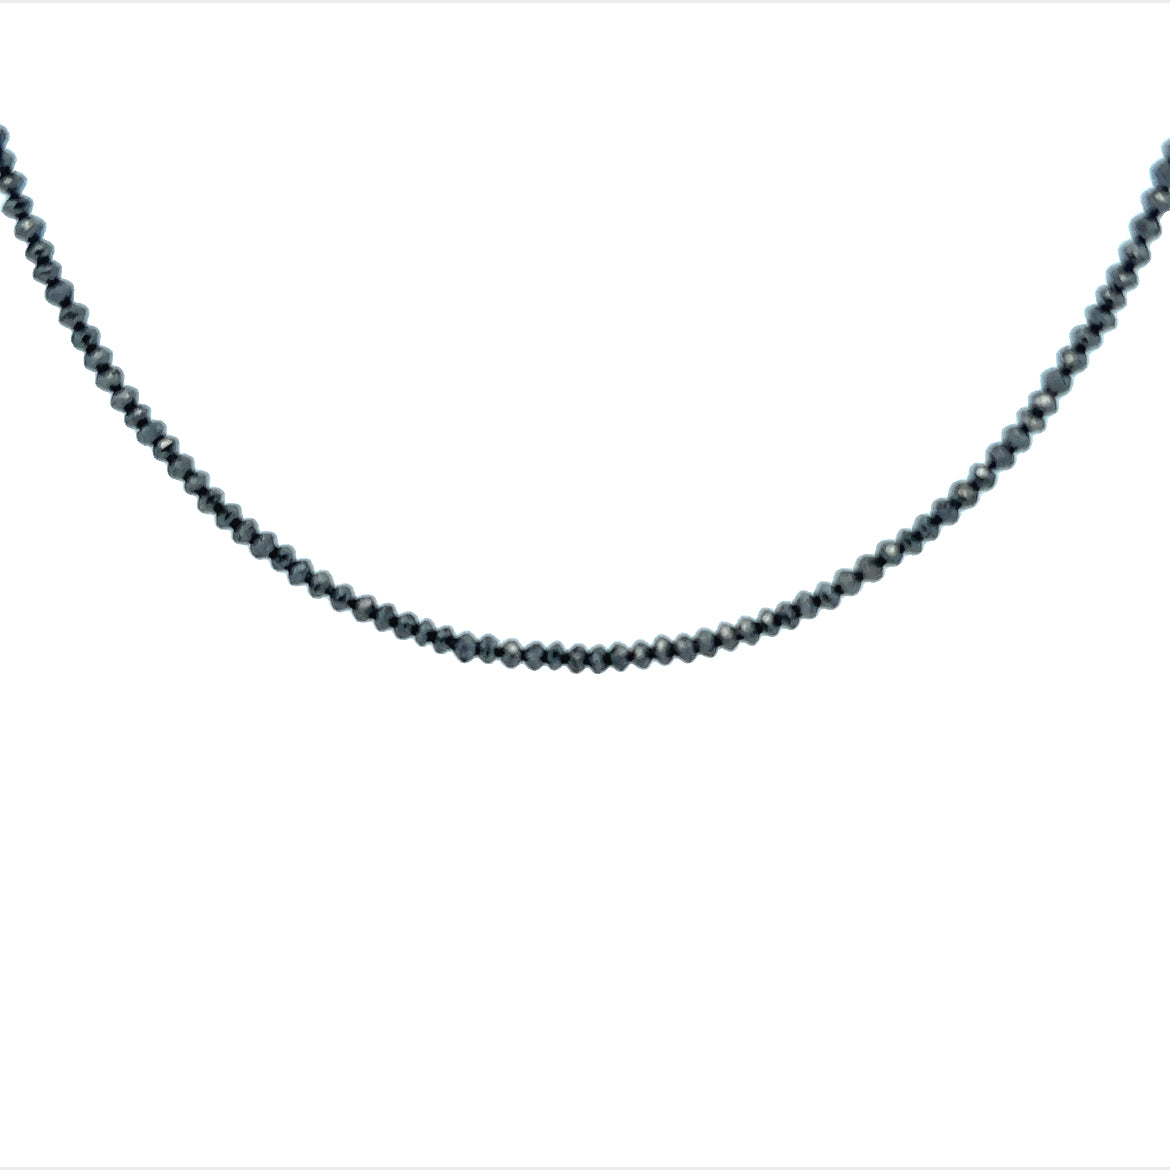 21.49ct Total Weight Black Diamond Bead Necklace